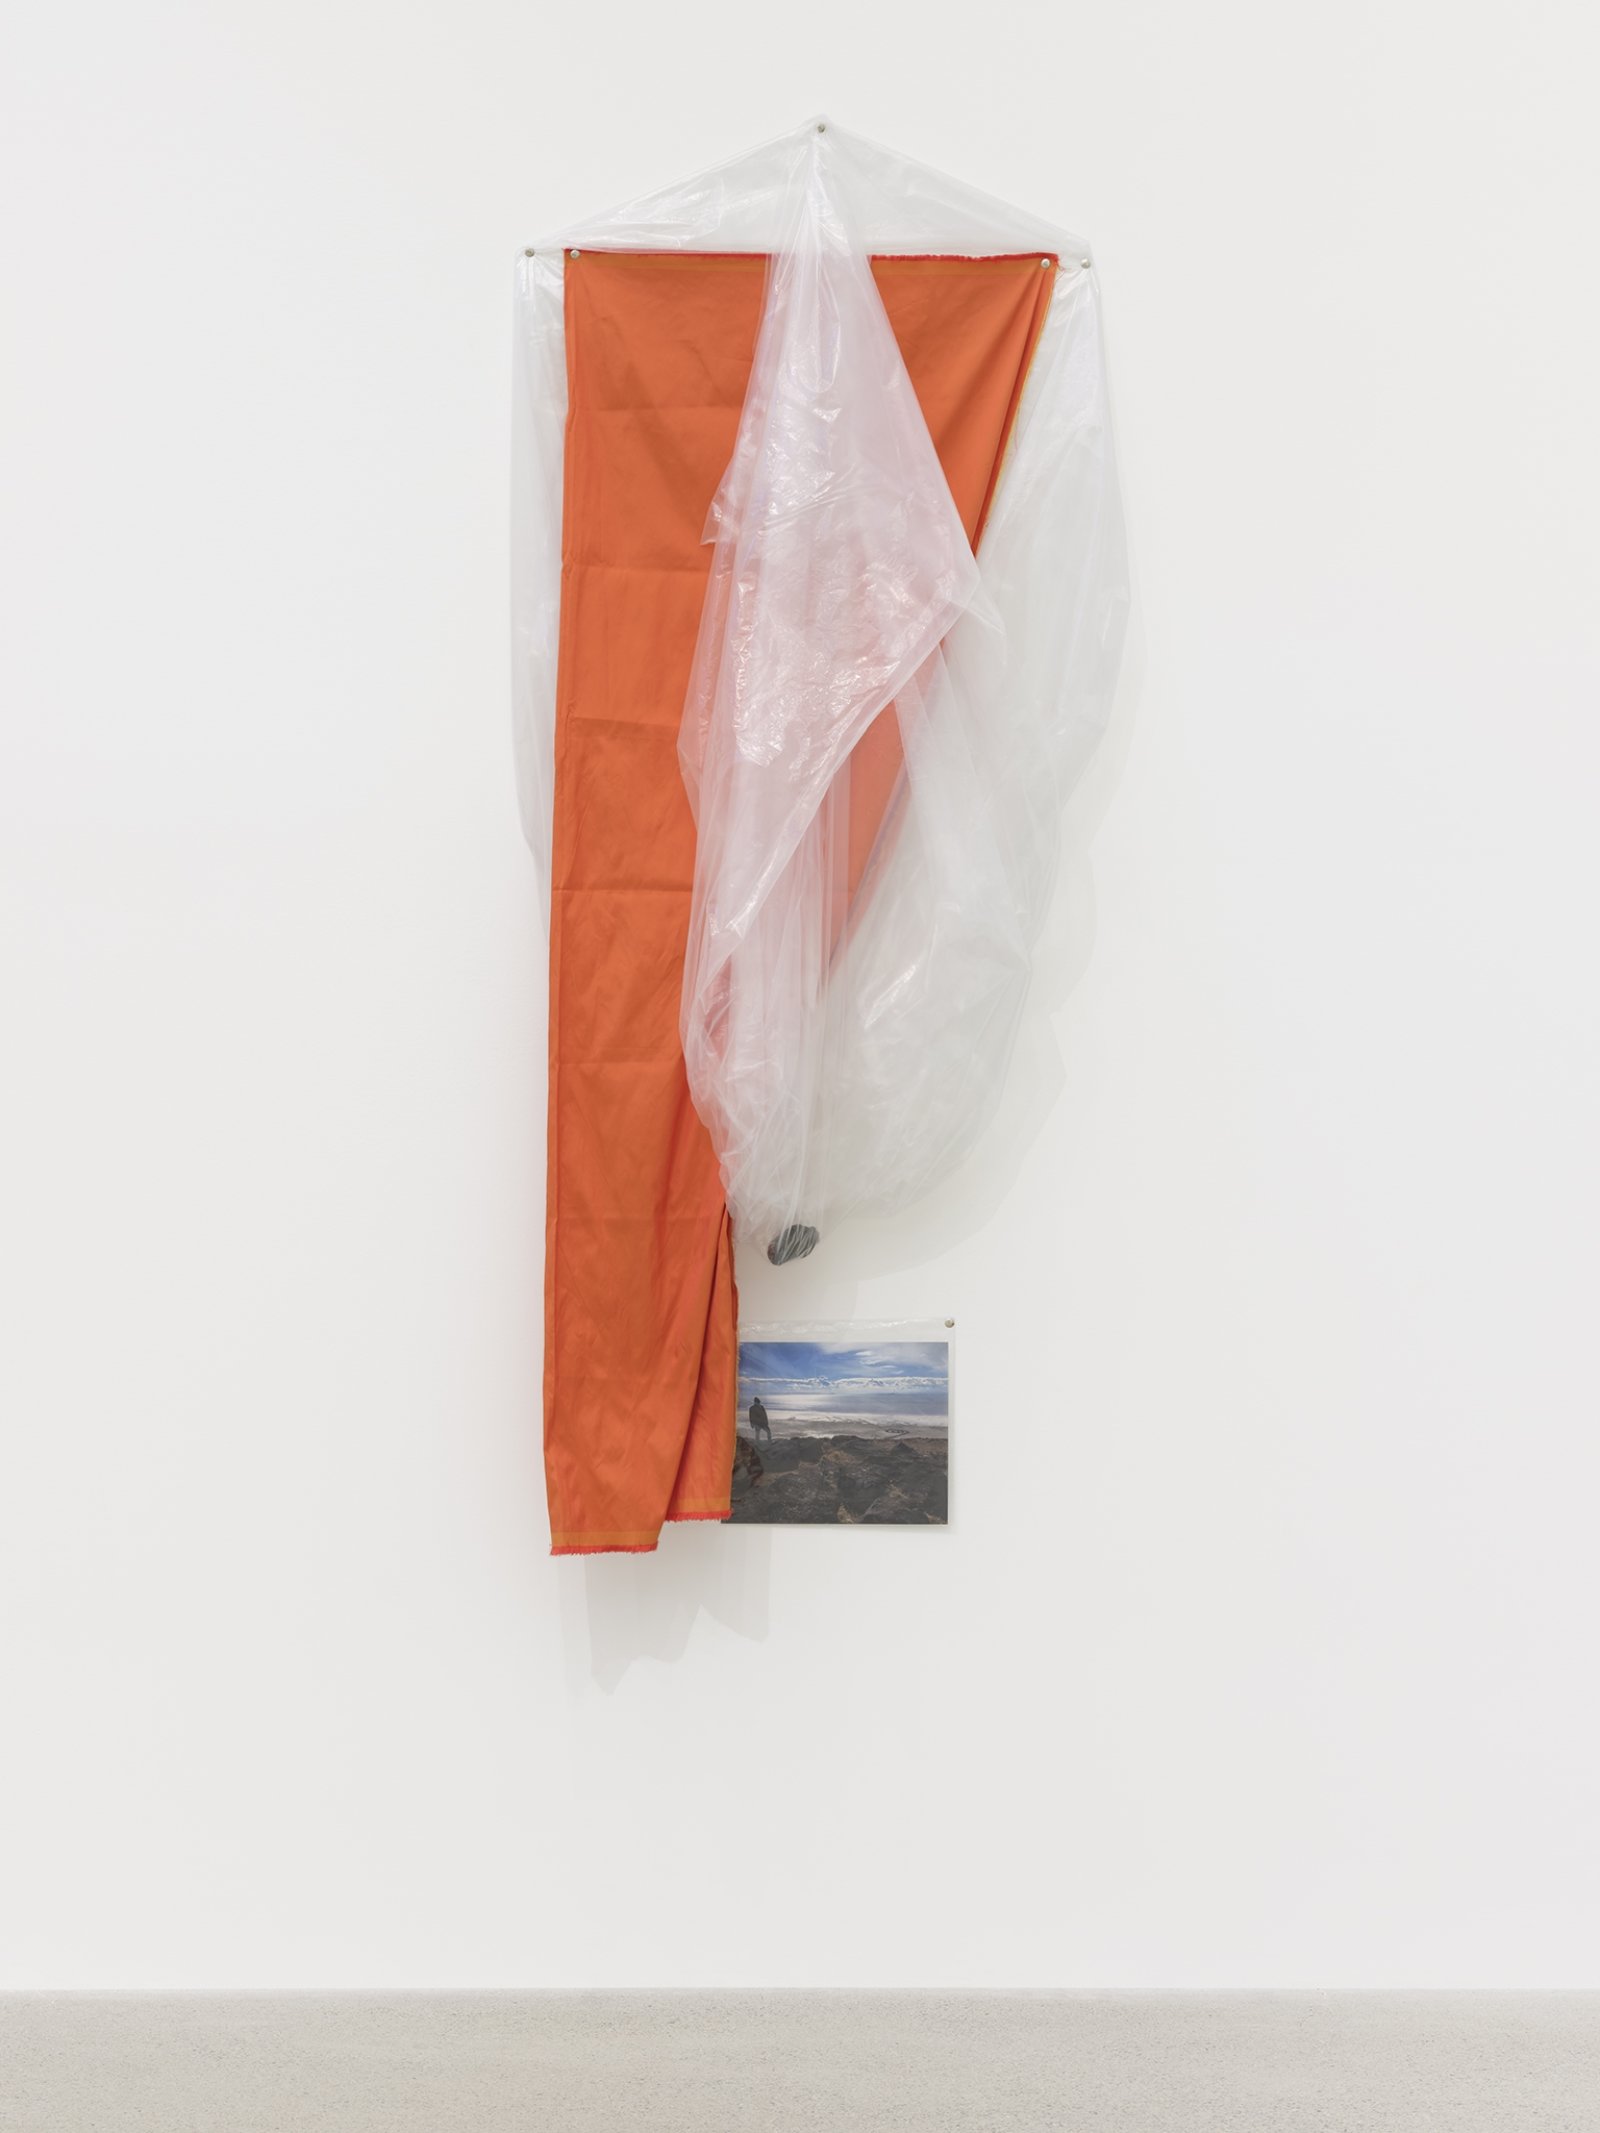 Duane Linklater, coup, 2016, plastic sheeting, polyester cloth, stone from Spiral Jetty, thumbtacks, colour photograph, 67 x 43 x 8 in. (170 x 109 x 20 cm)